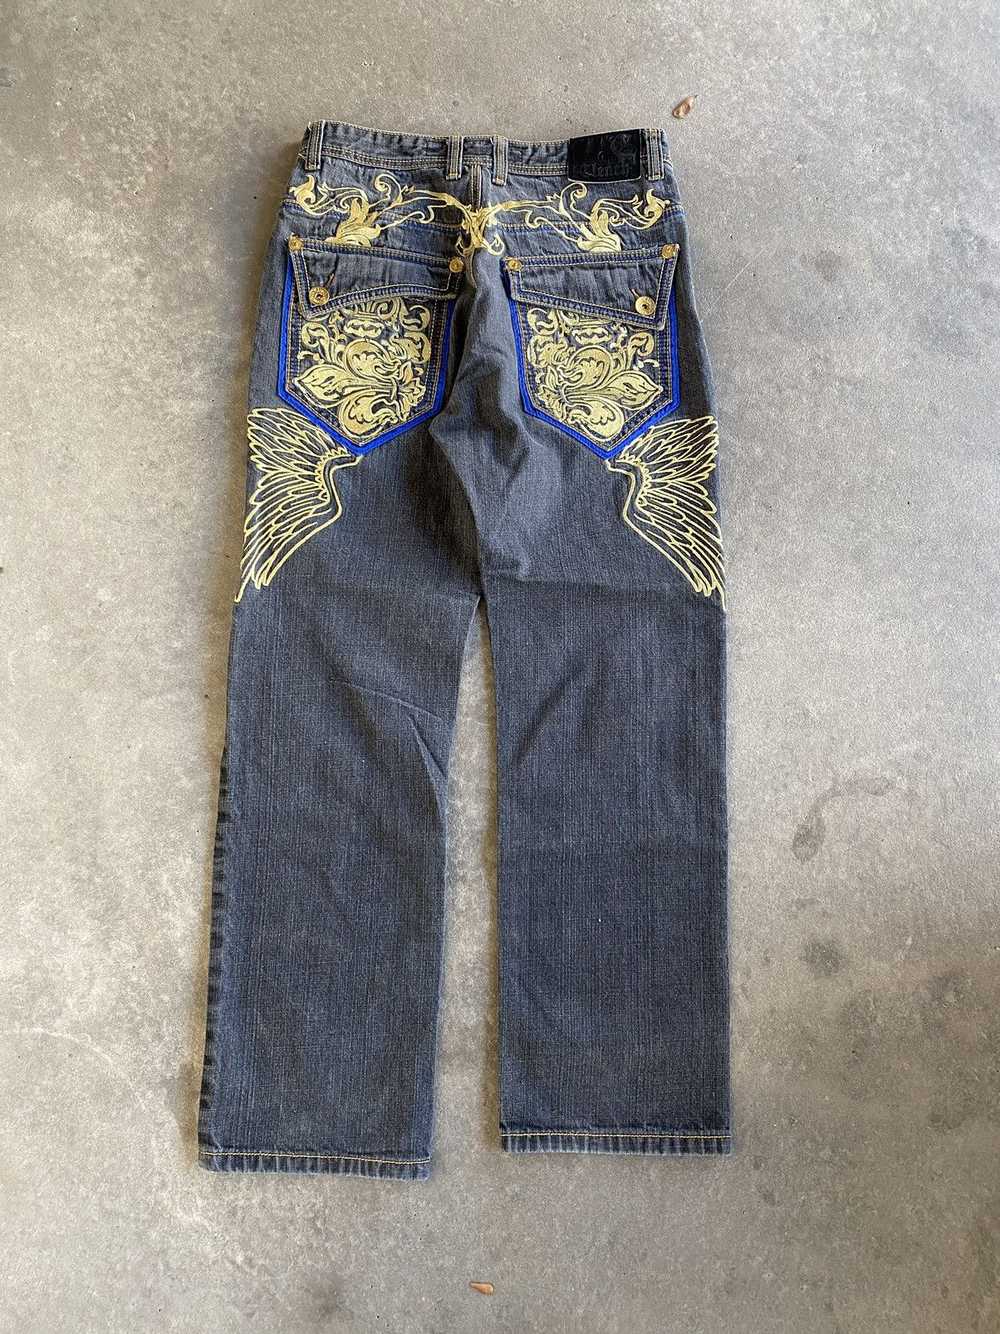 Clench × Jnco × Southpole Embroidered Clench jeans - image 2